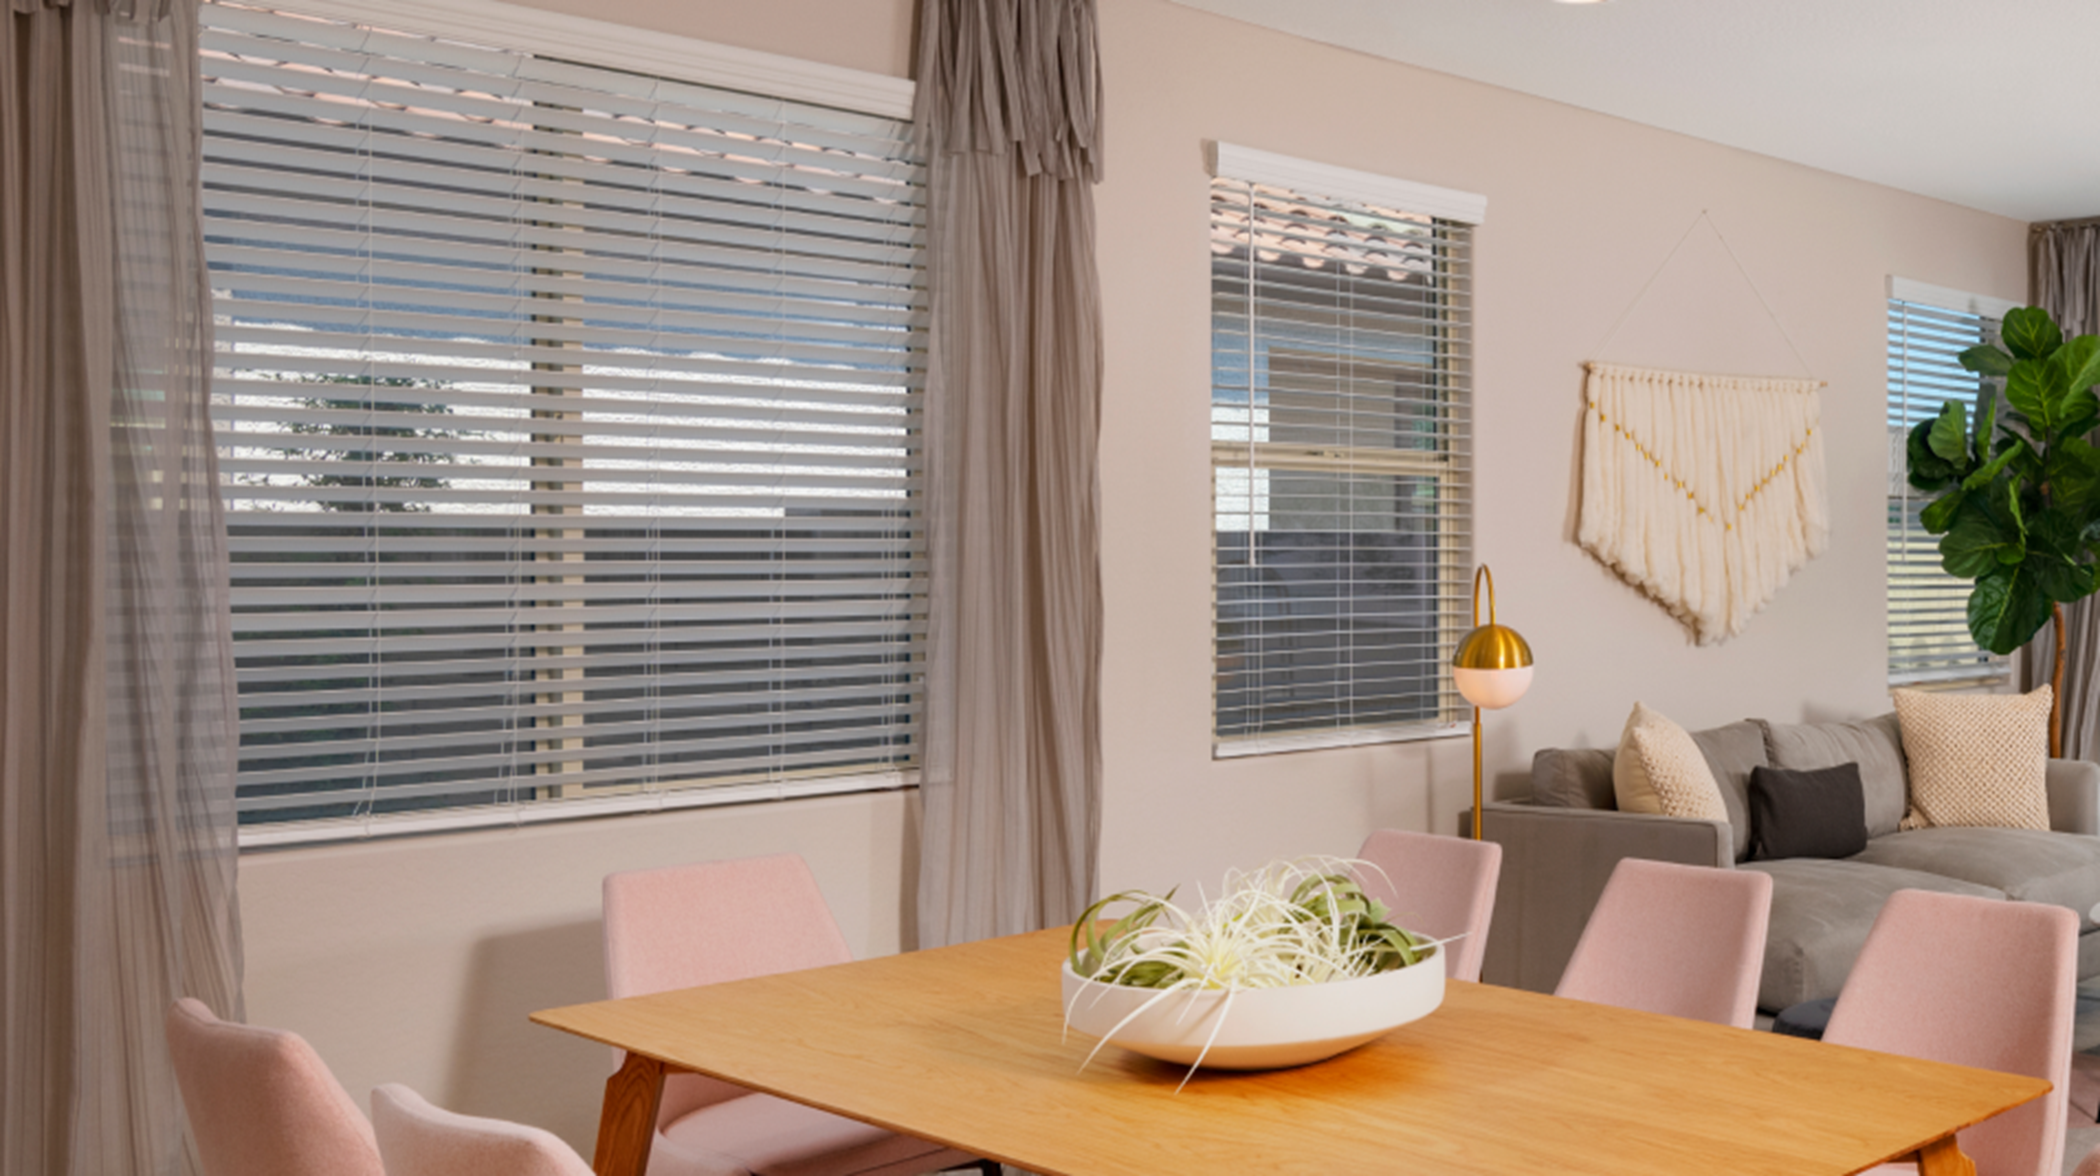 Window blinds in shared space